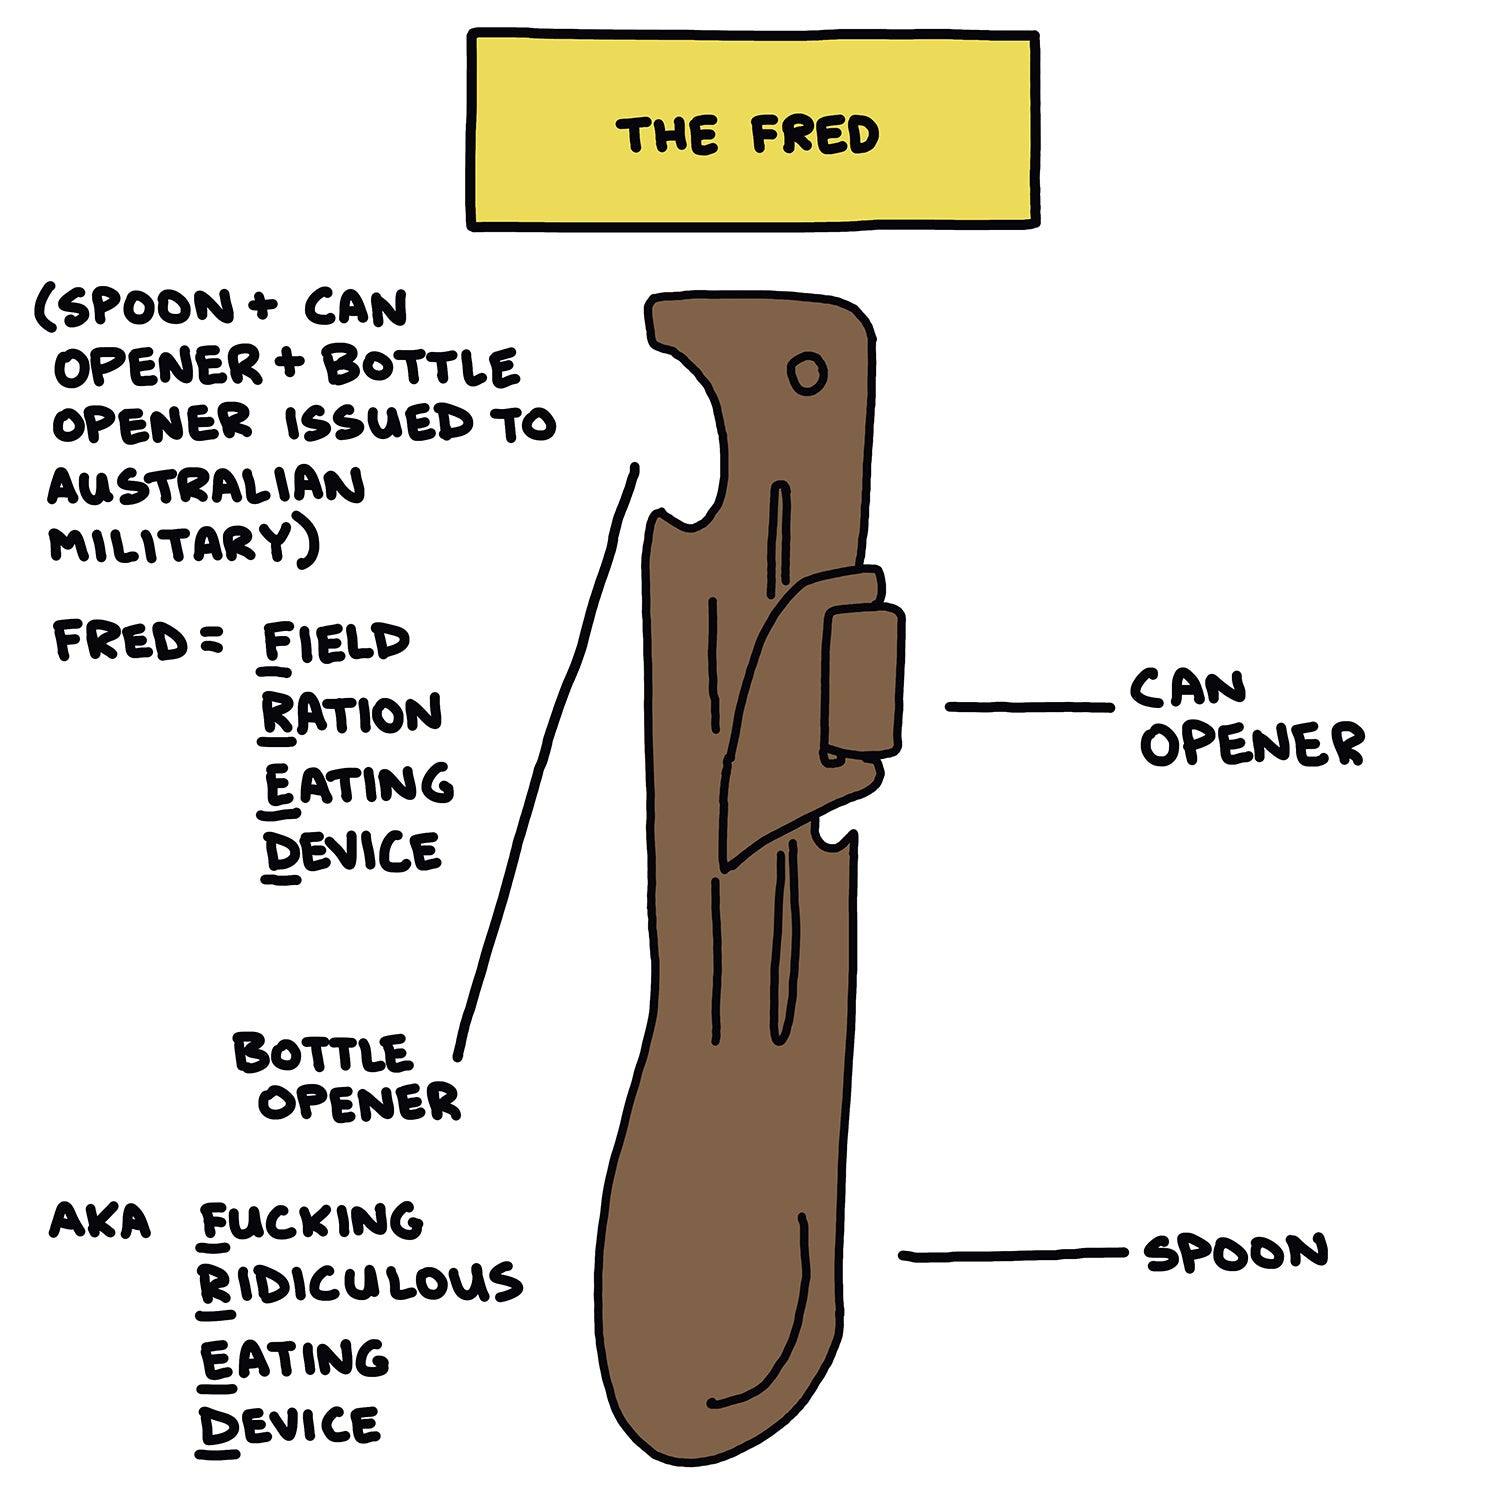 The Fred